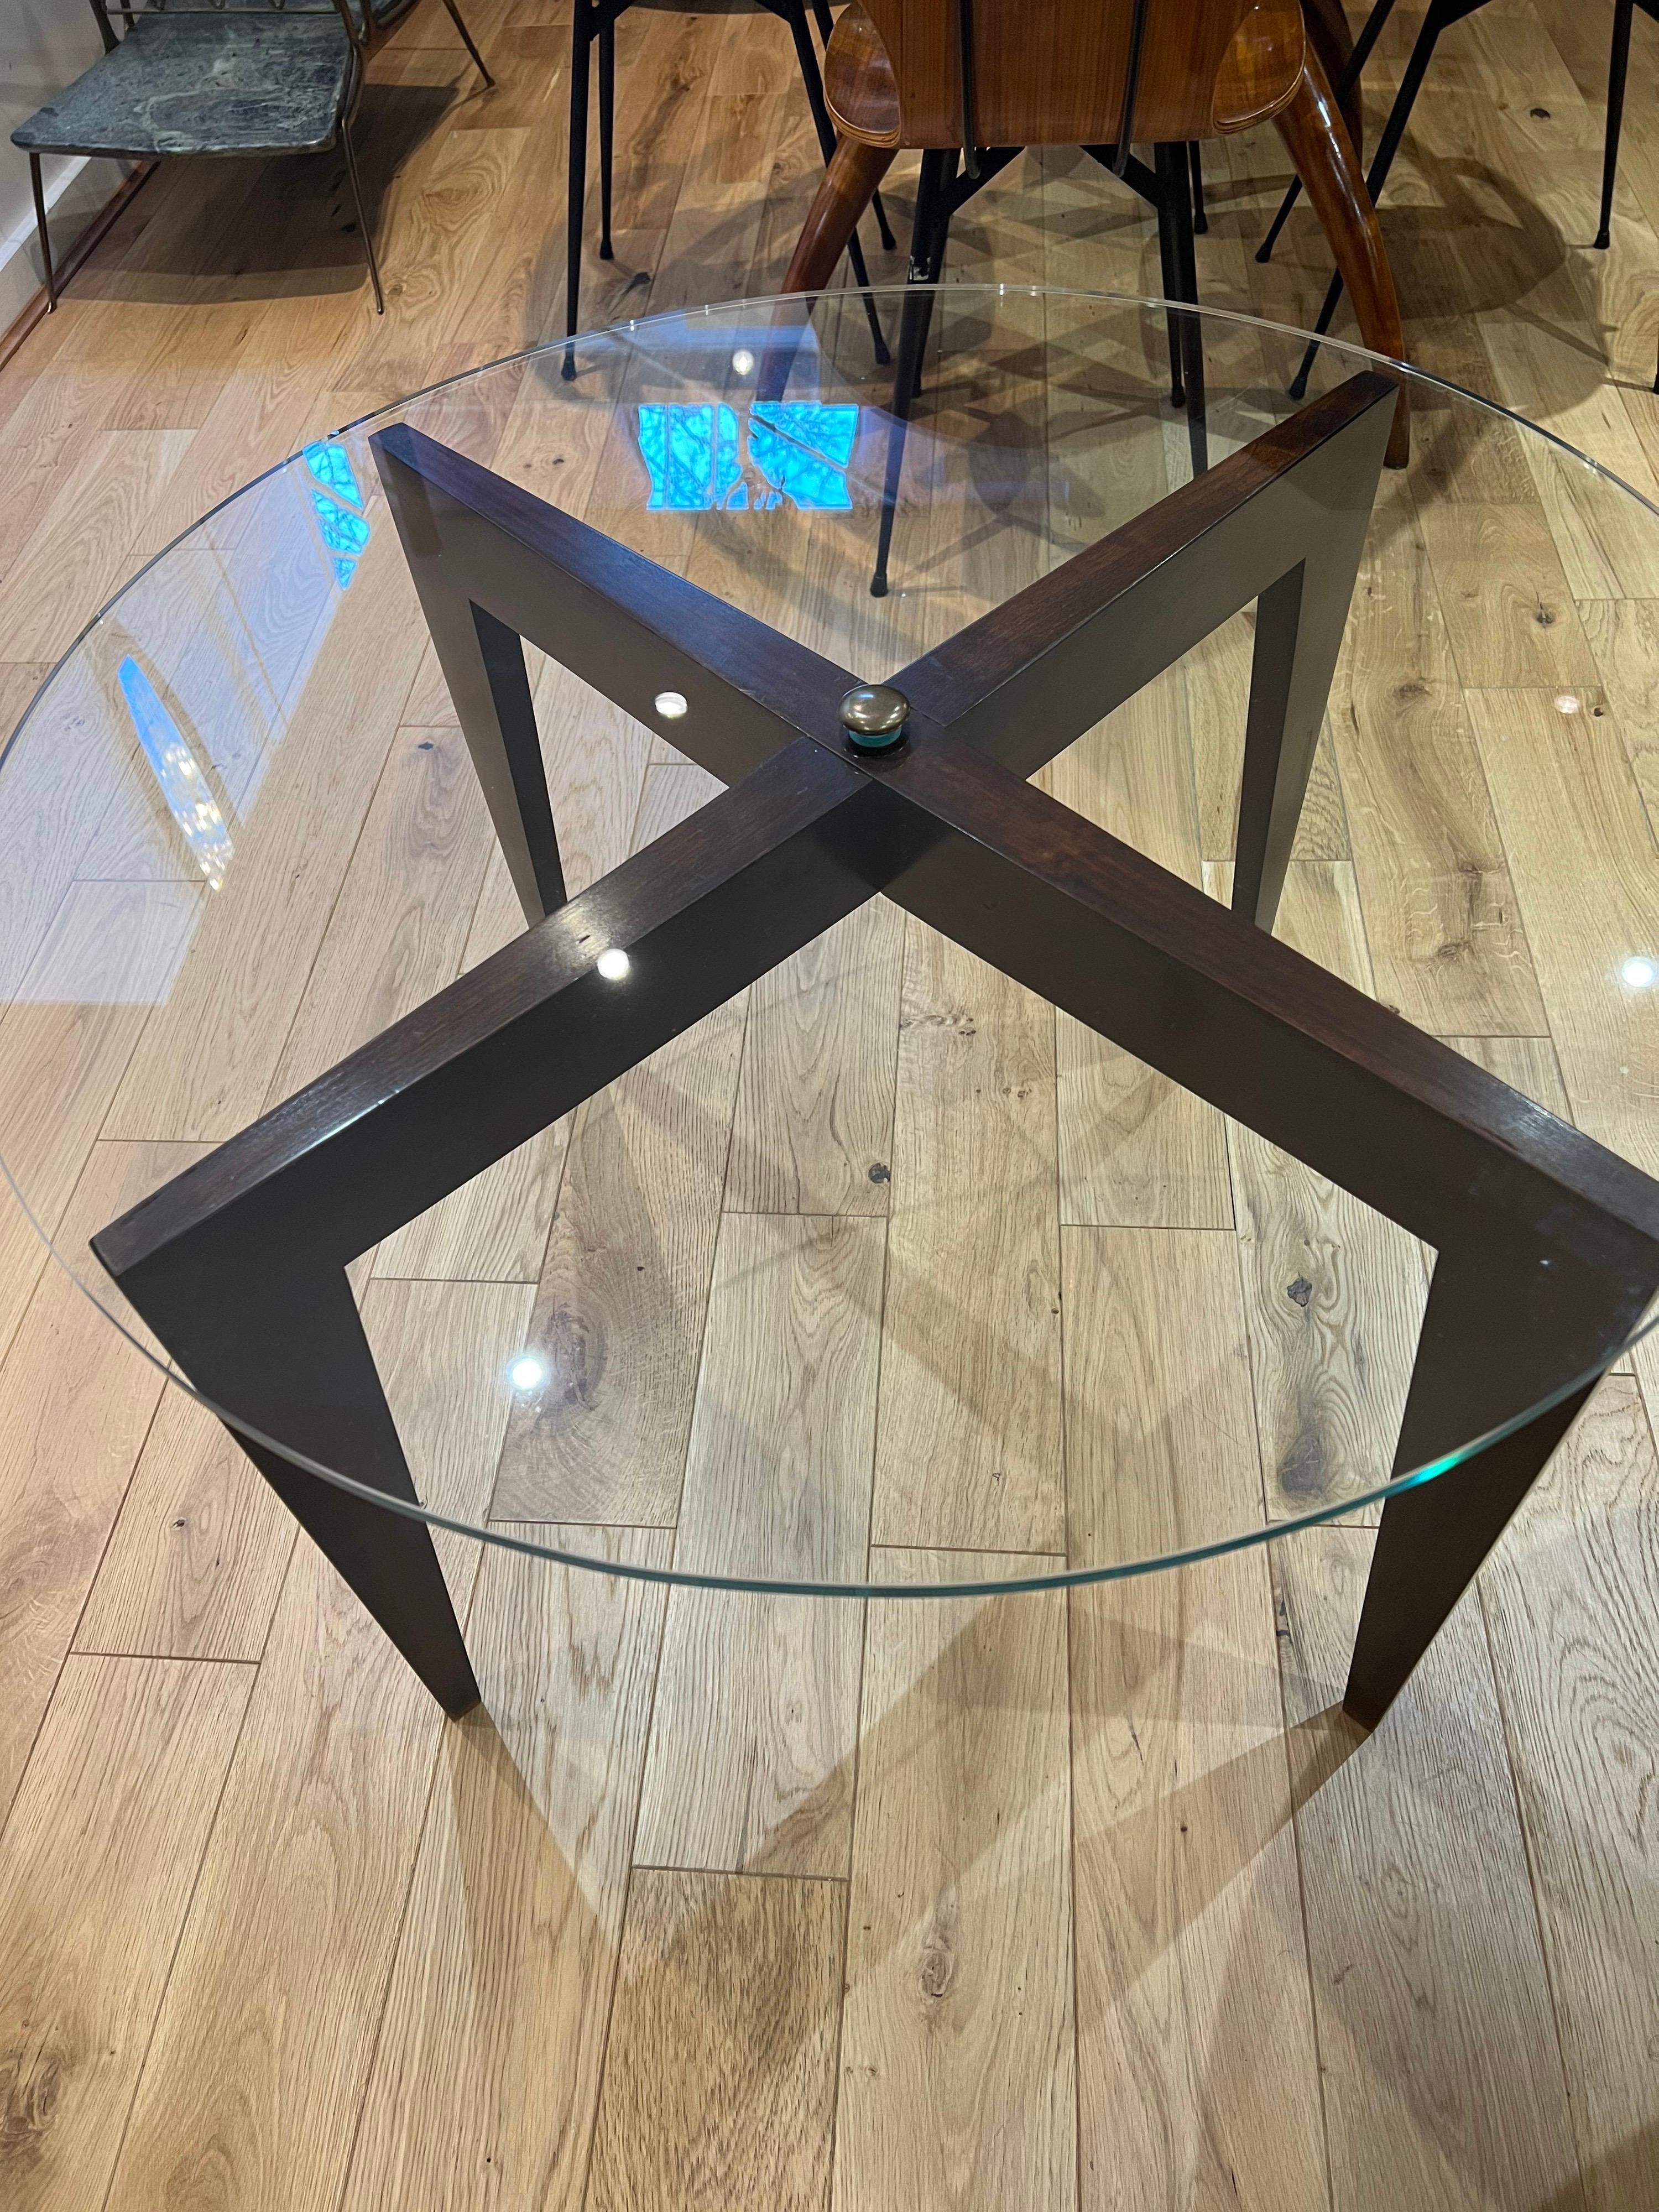 An original X form iconic Gio Ponti table in cherry wood with a circular glass top for Fondazione Garzanti di Forli - Interiors. This fabulous piece was in the private collection of the Ponti family in Florence and comes with a signed certificate of